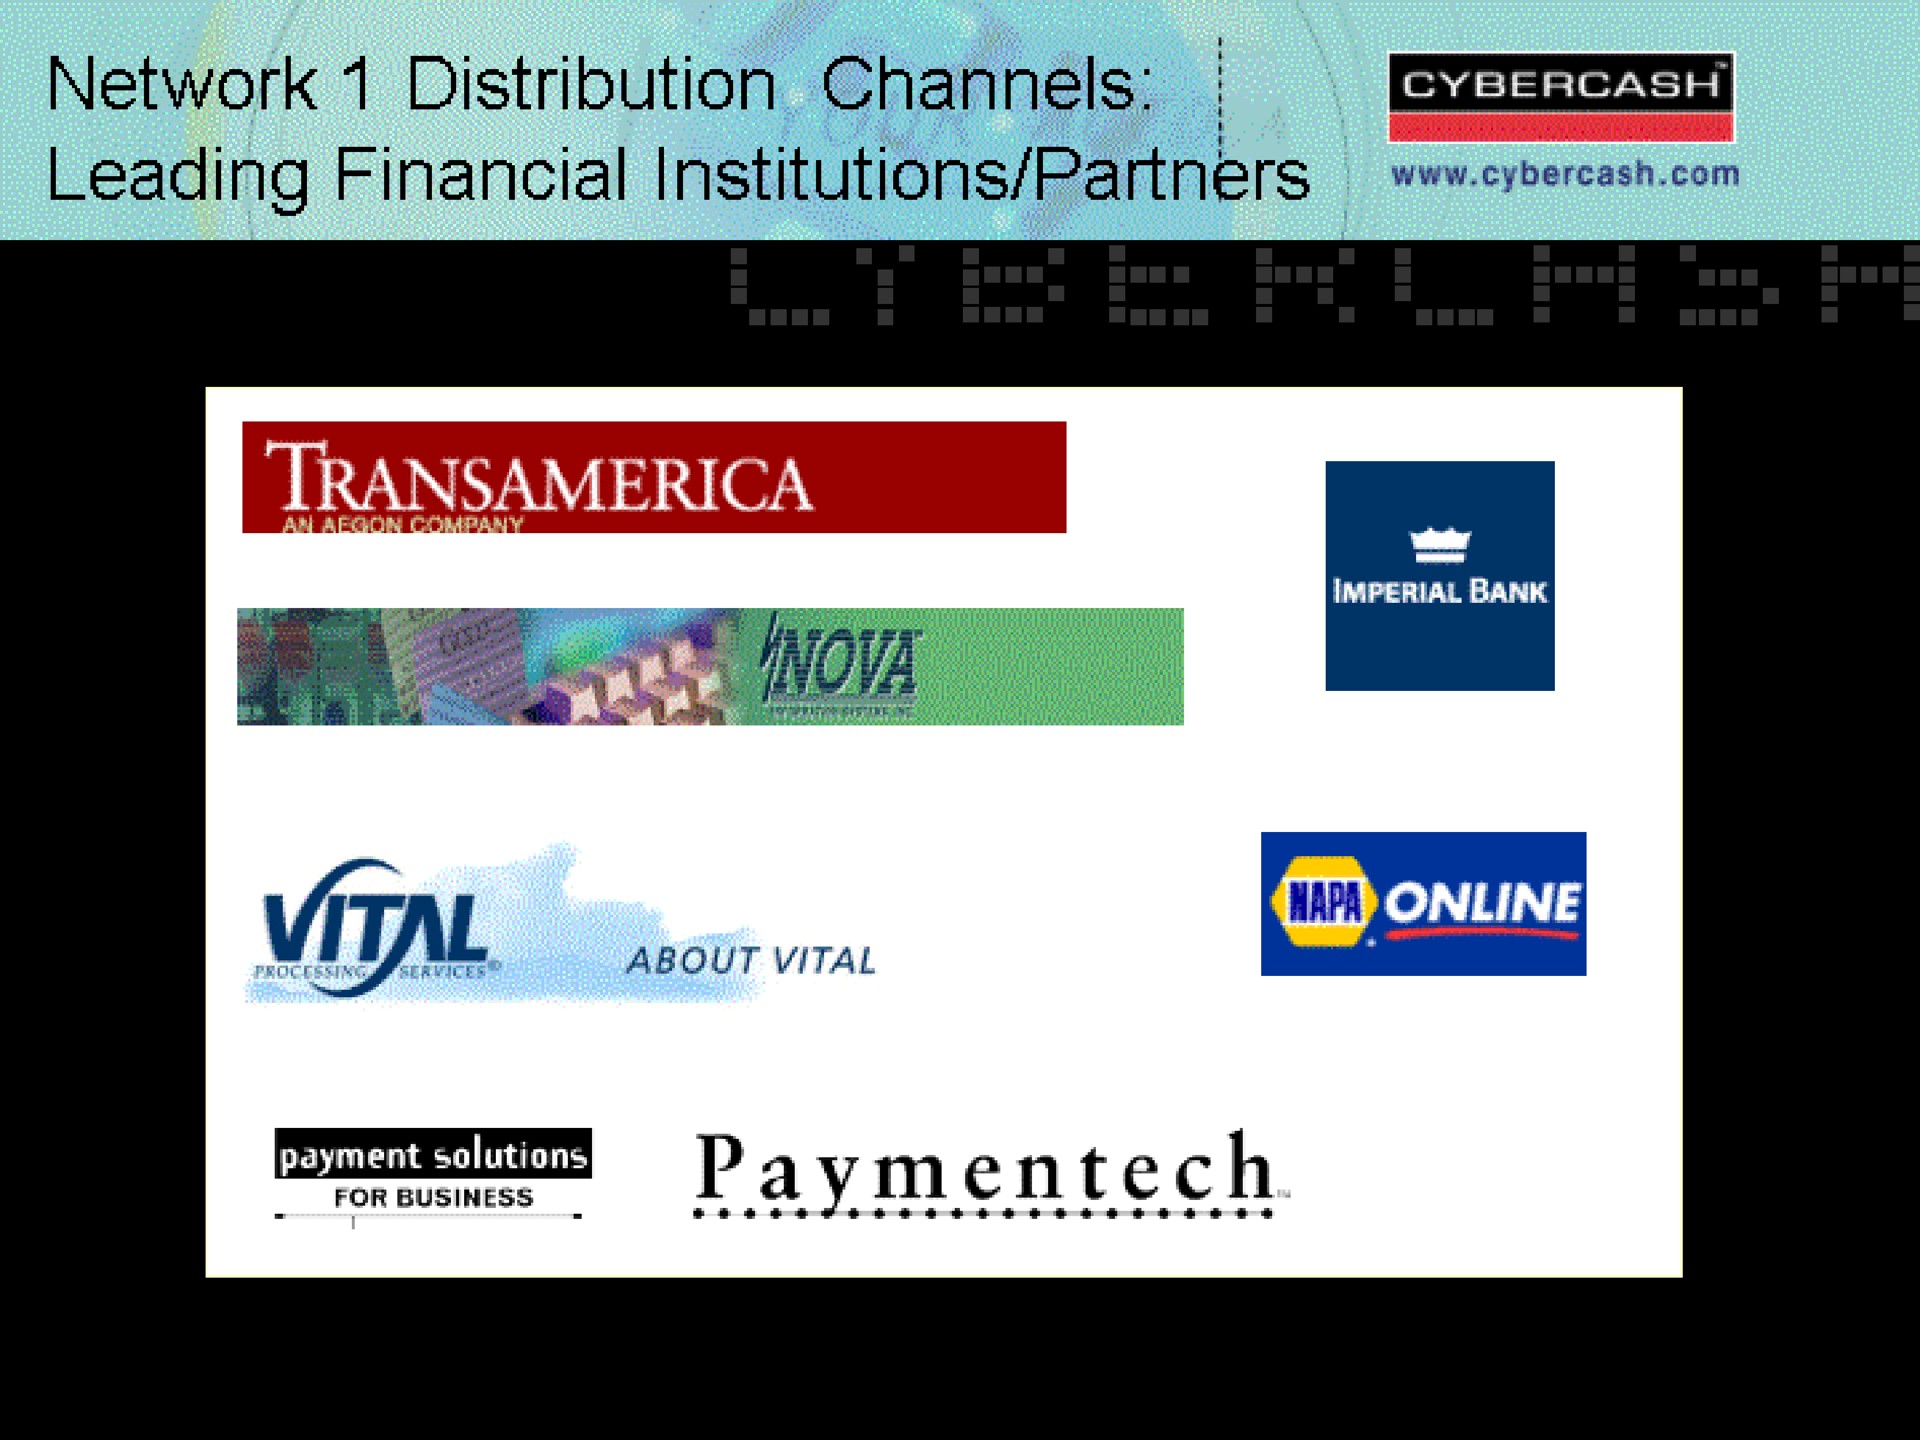 network distribution channels leading financial institutions | CyberCash